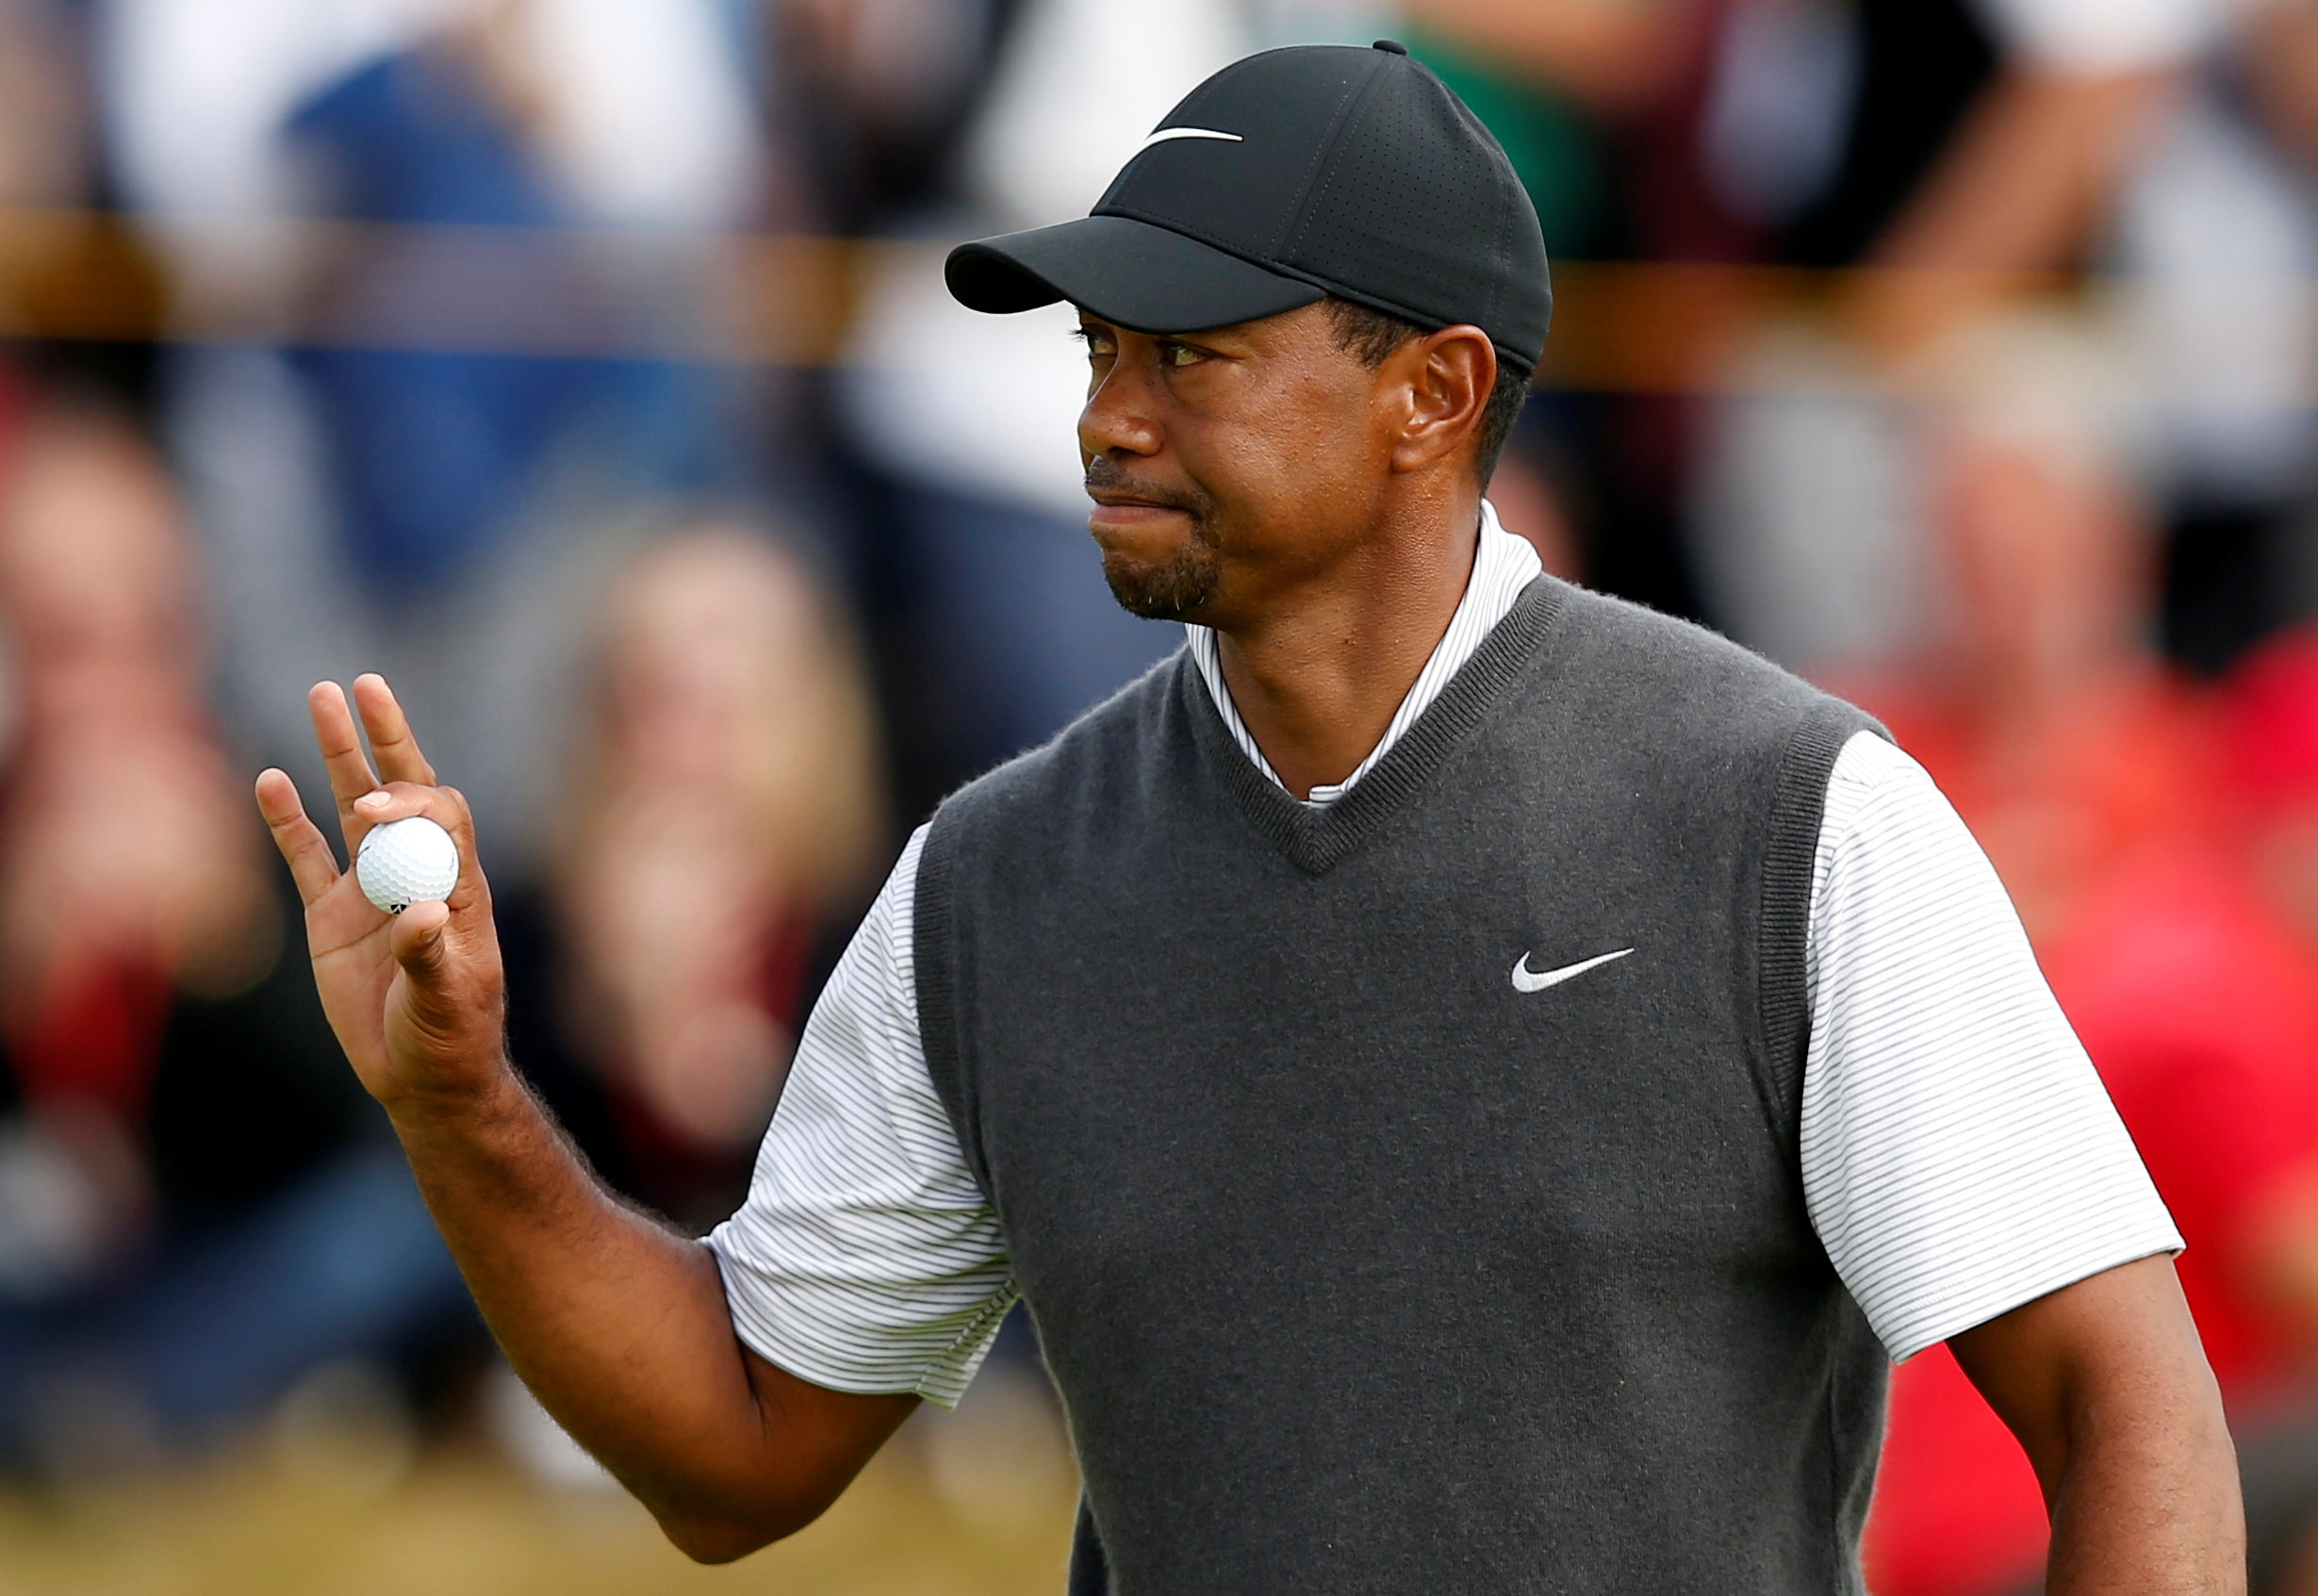 Woods charges into contention with third-round 66 at Carnoustie